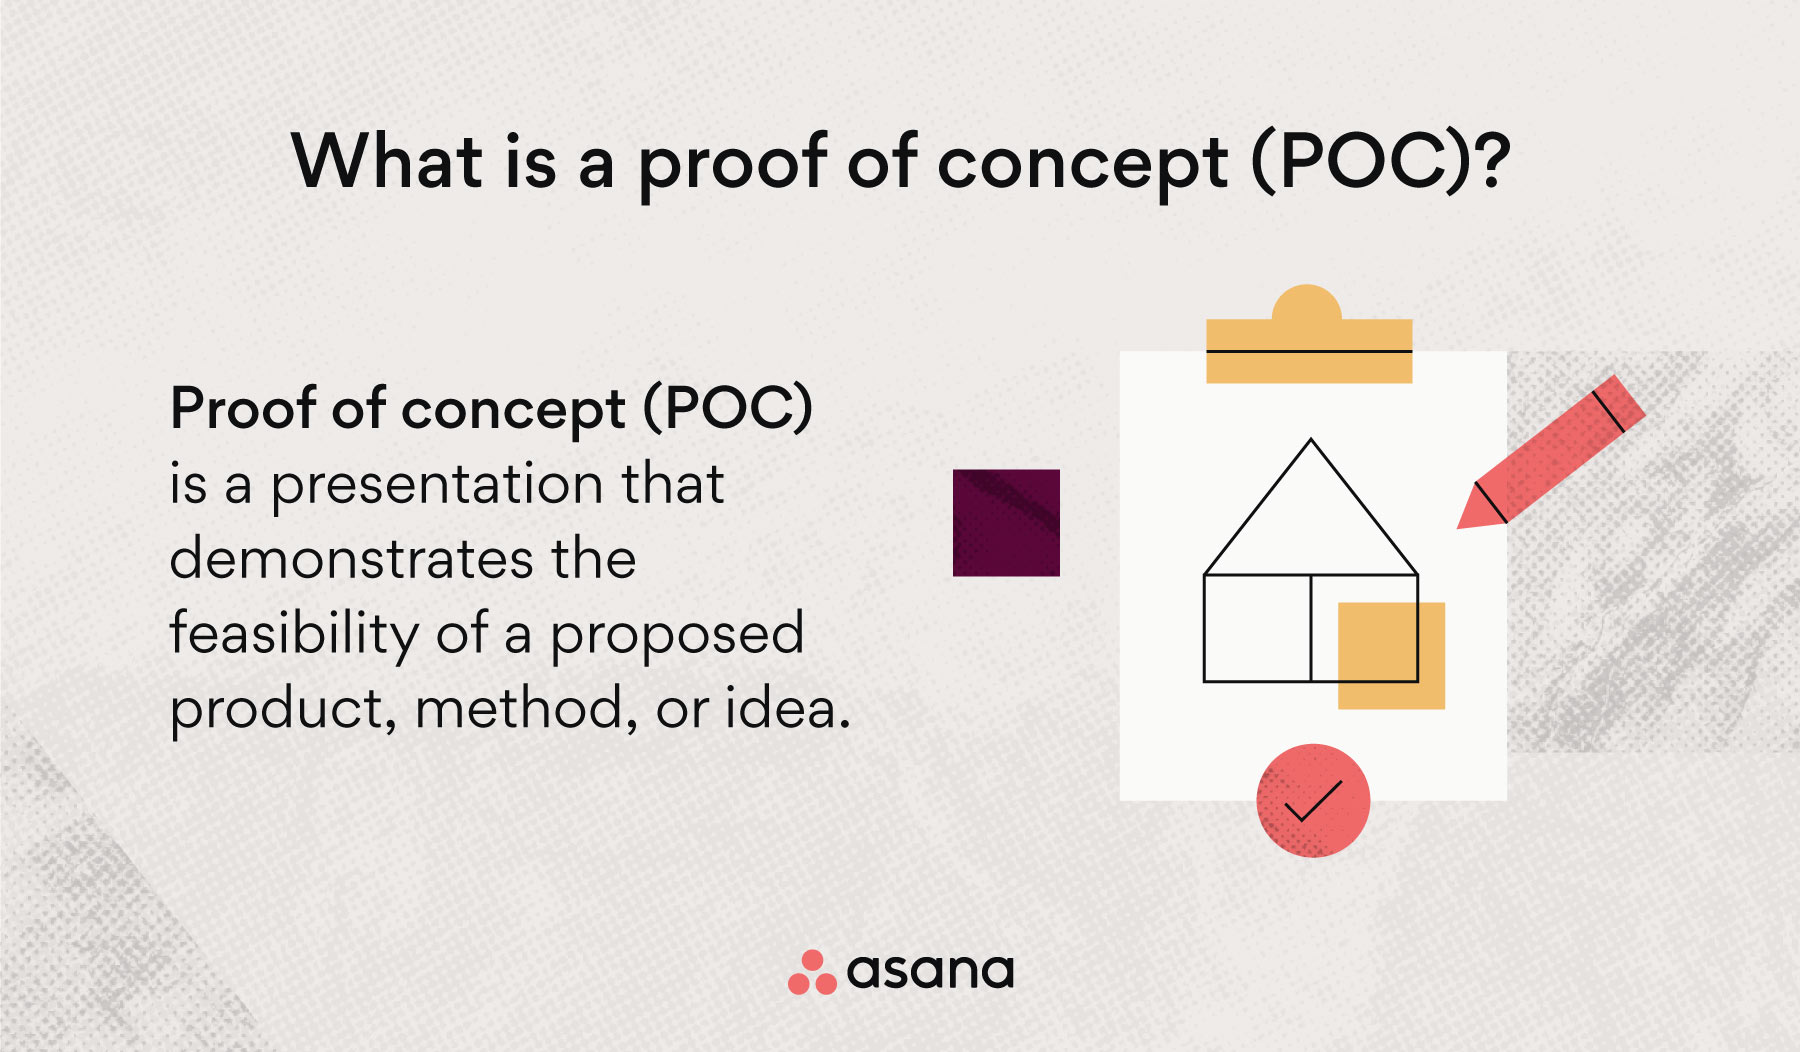 what is proof of concept (POC)?